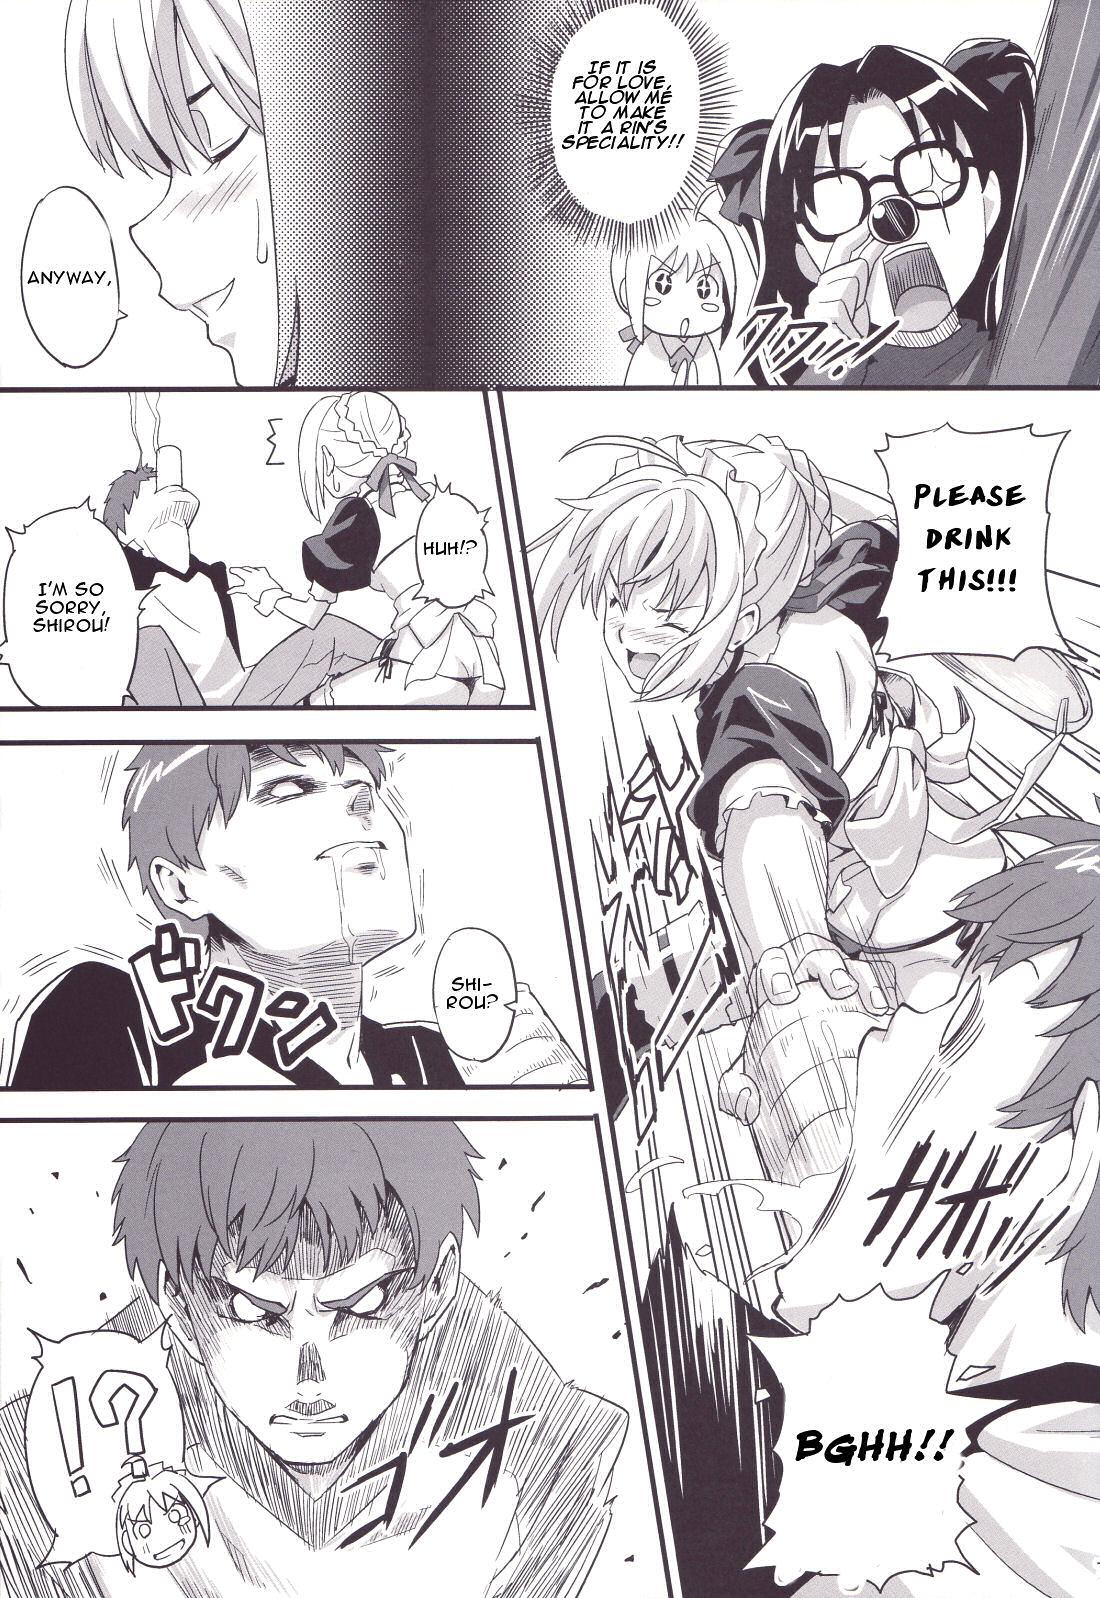 Tiny Titties Outama King of Soul - Fate stay night Gay Boyporn - Page 6